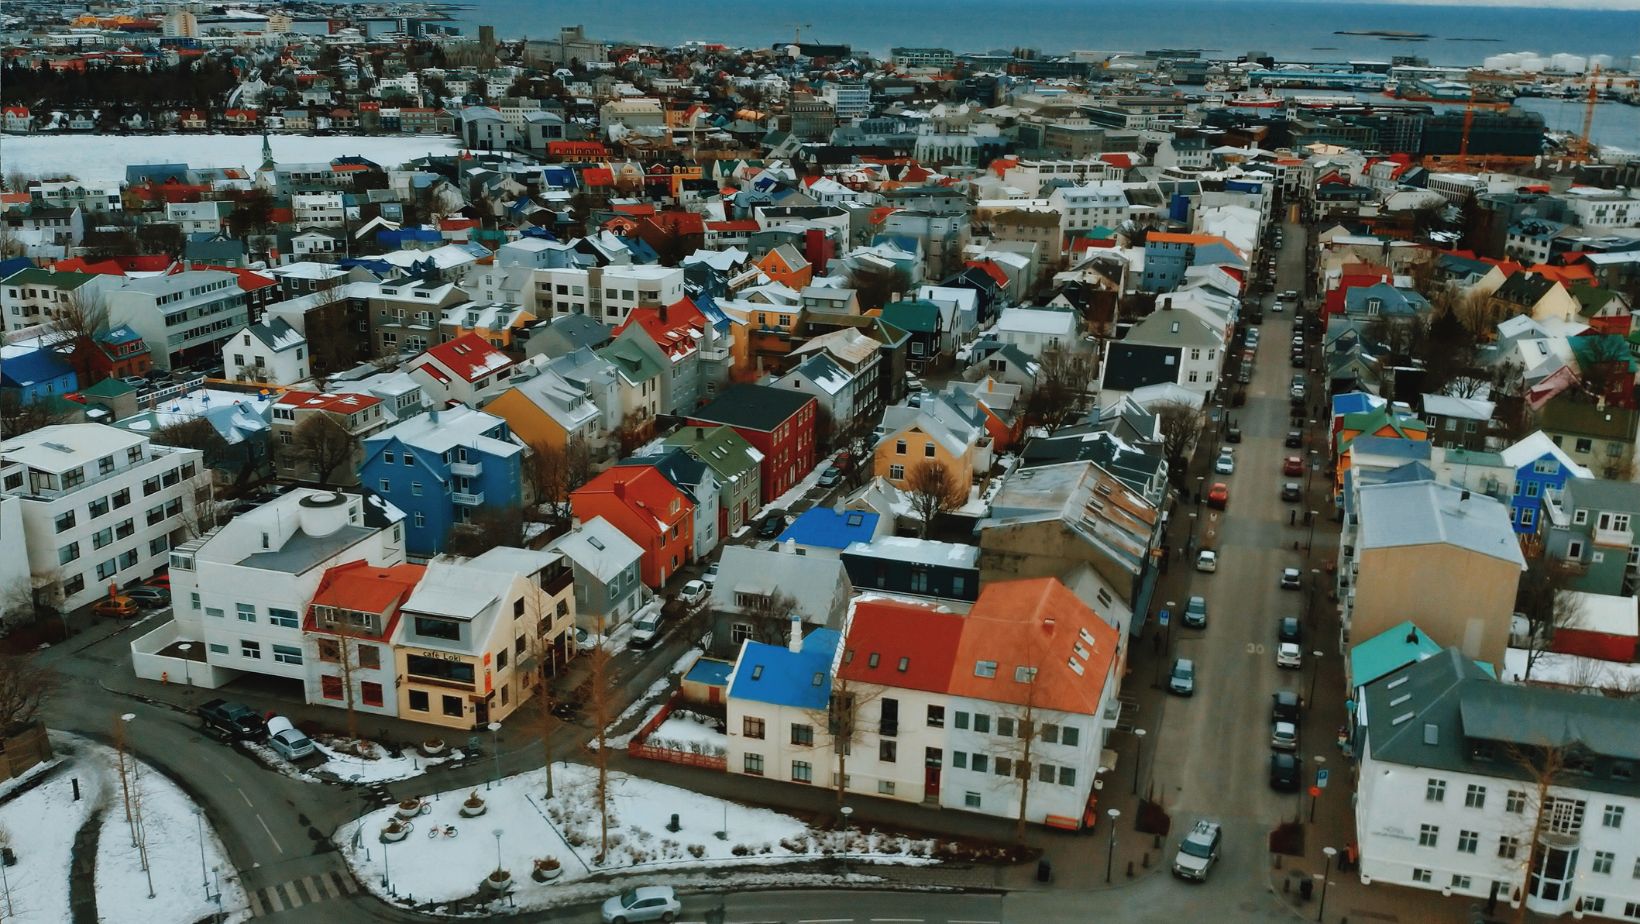 Scenery of streets and buildings of snowy Reykjavik